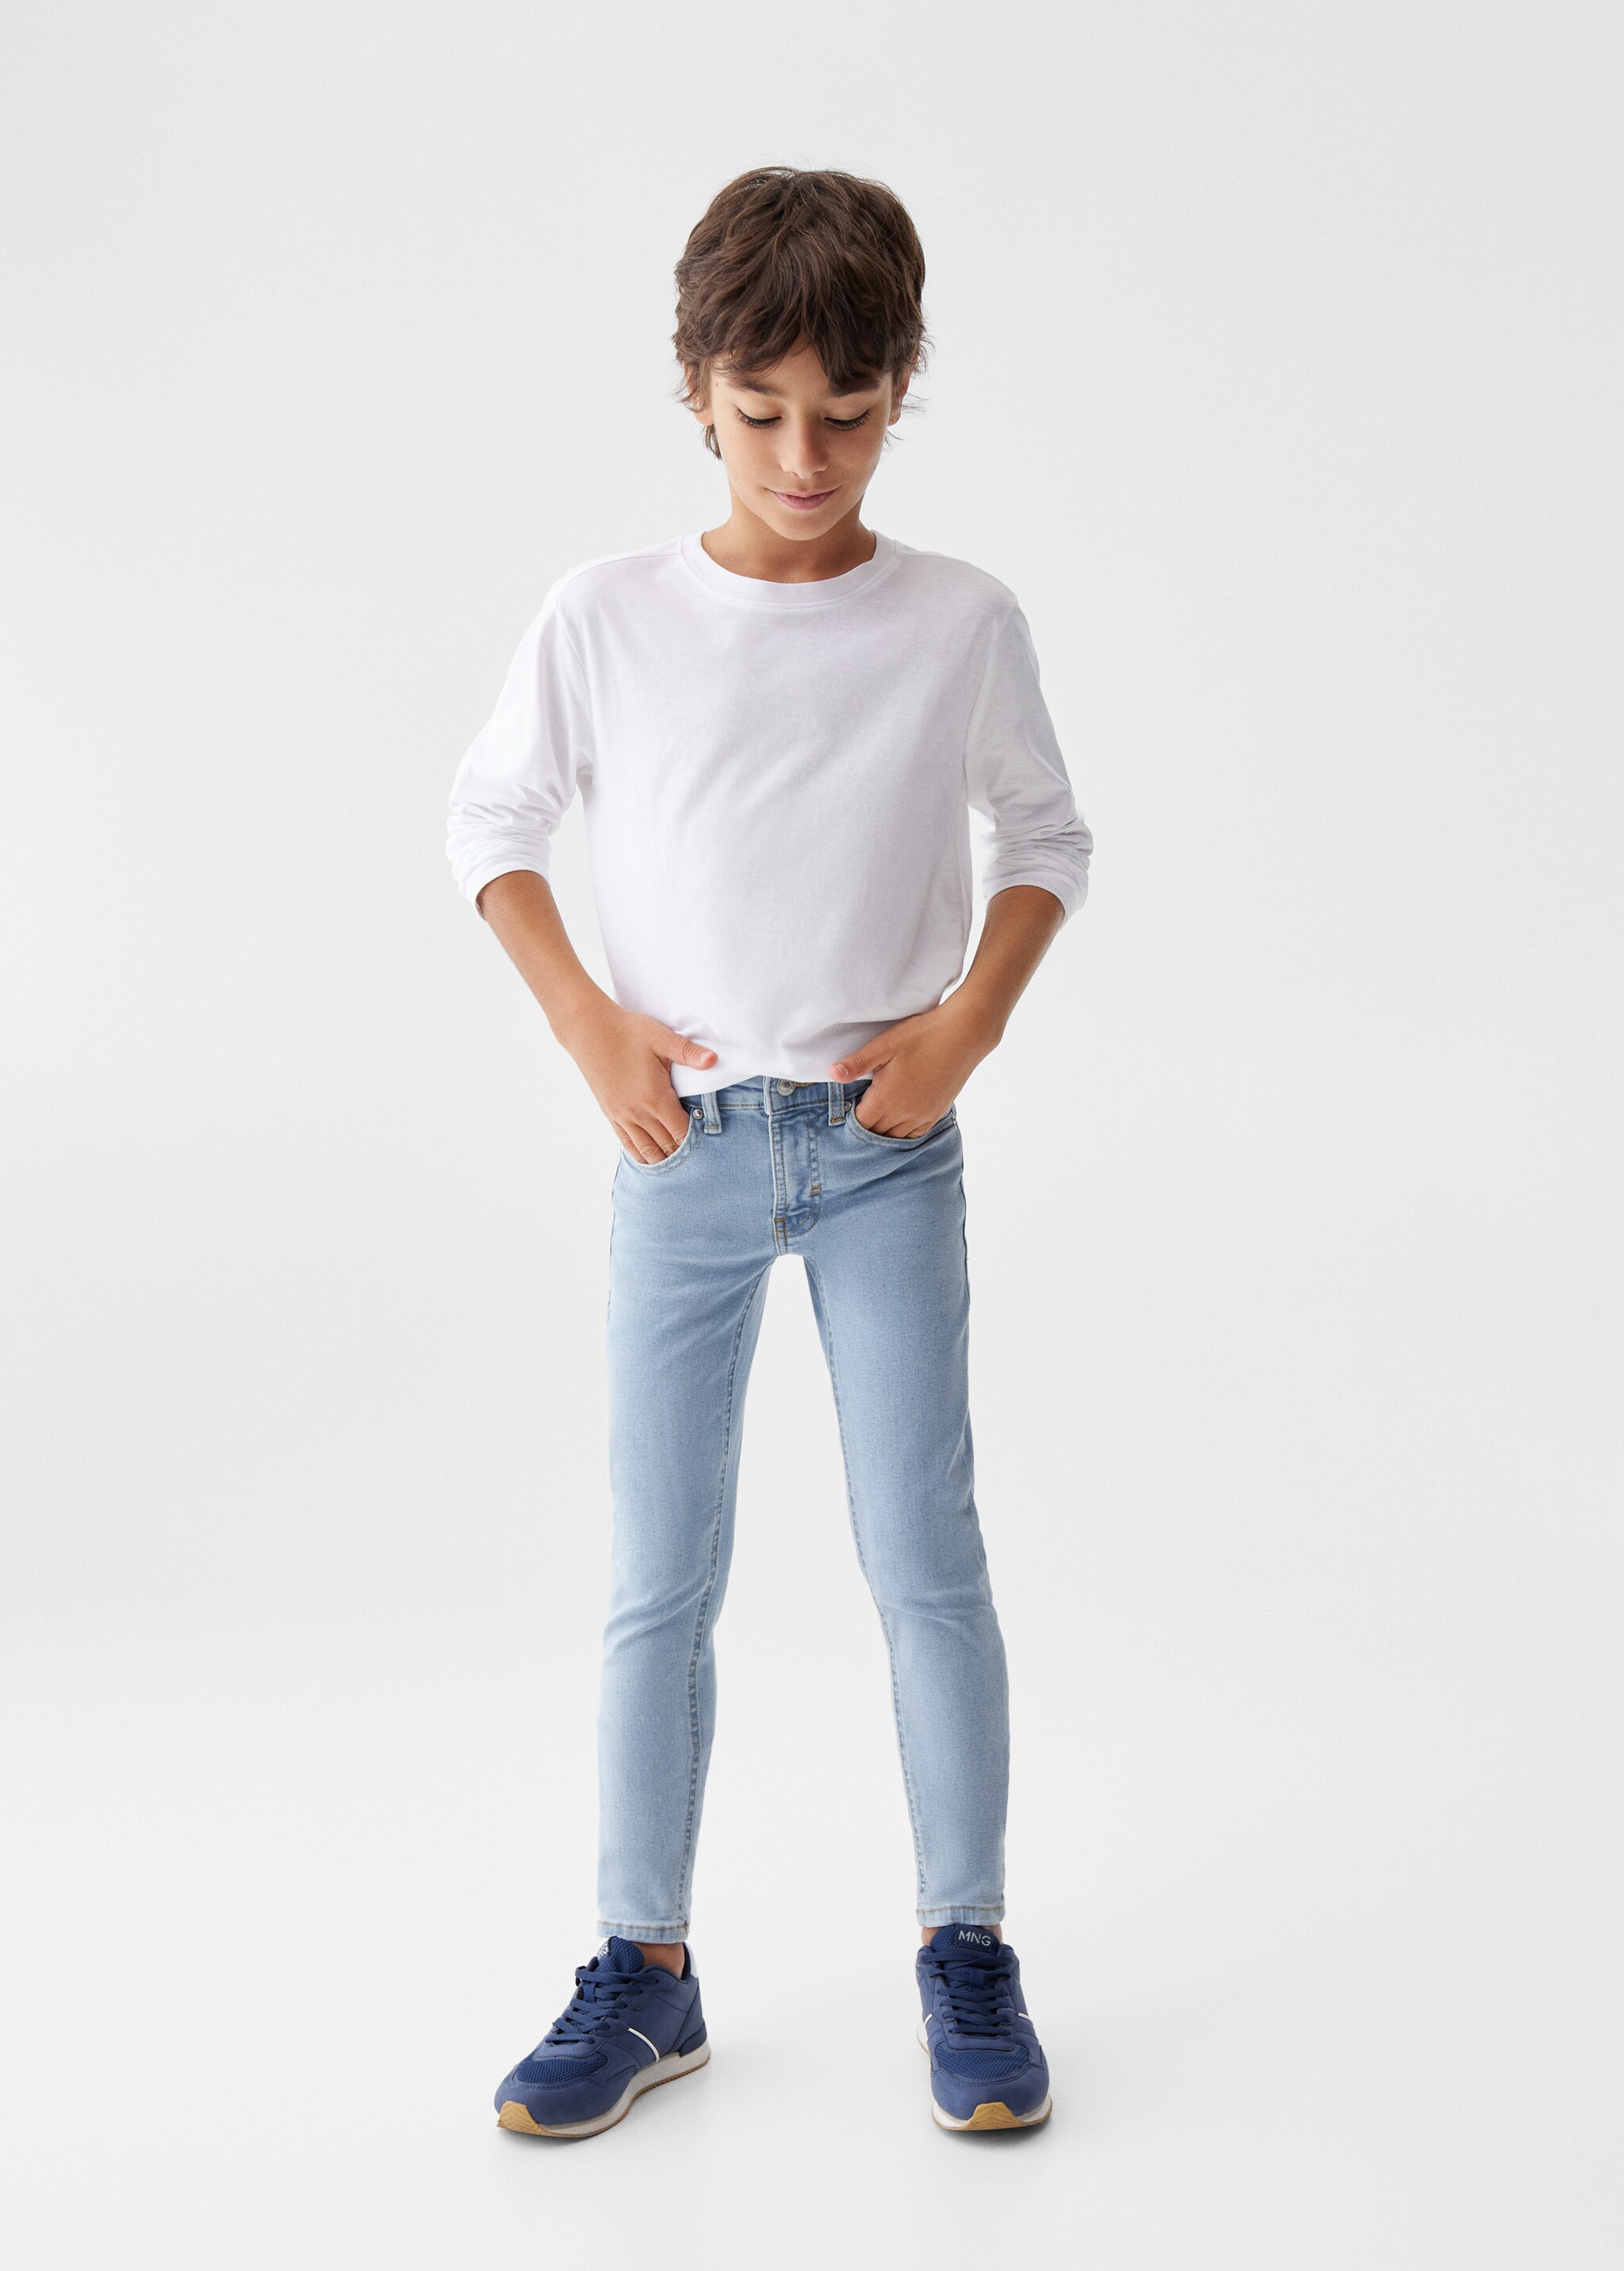 Skinny jeans - Details of the article 1